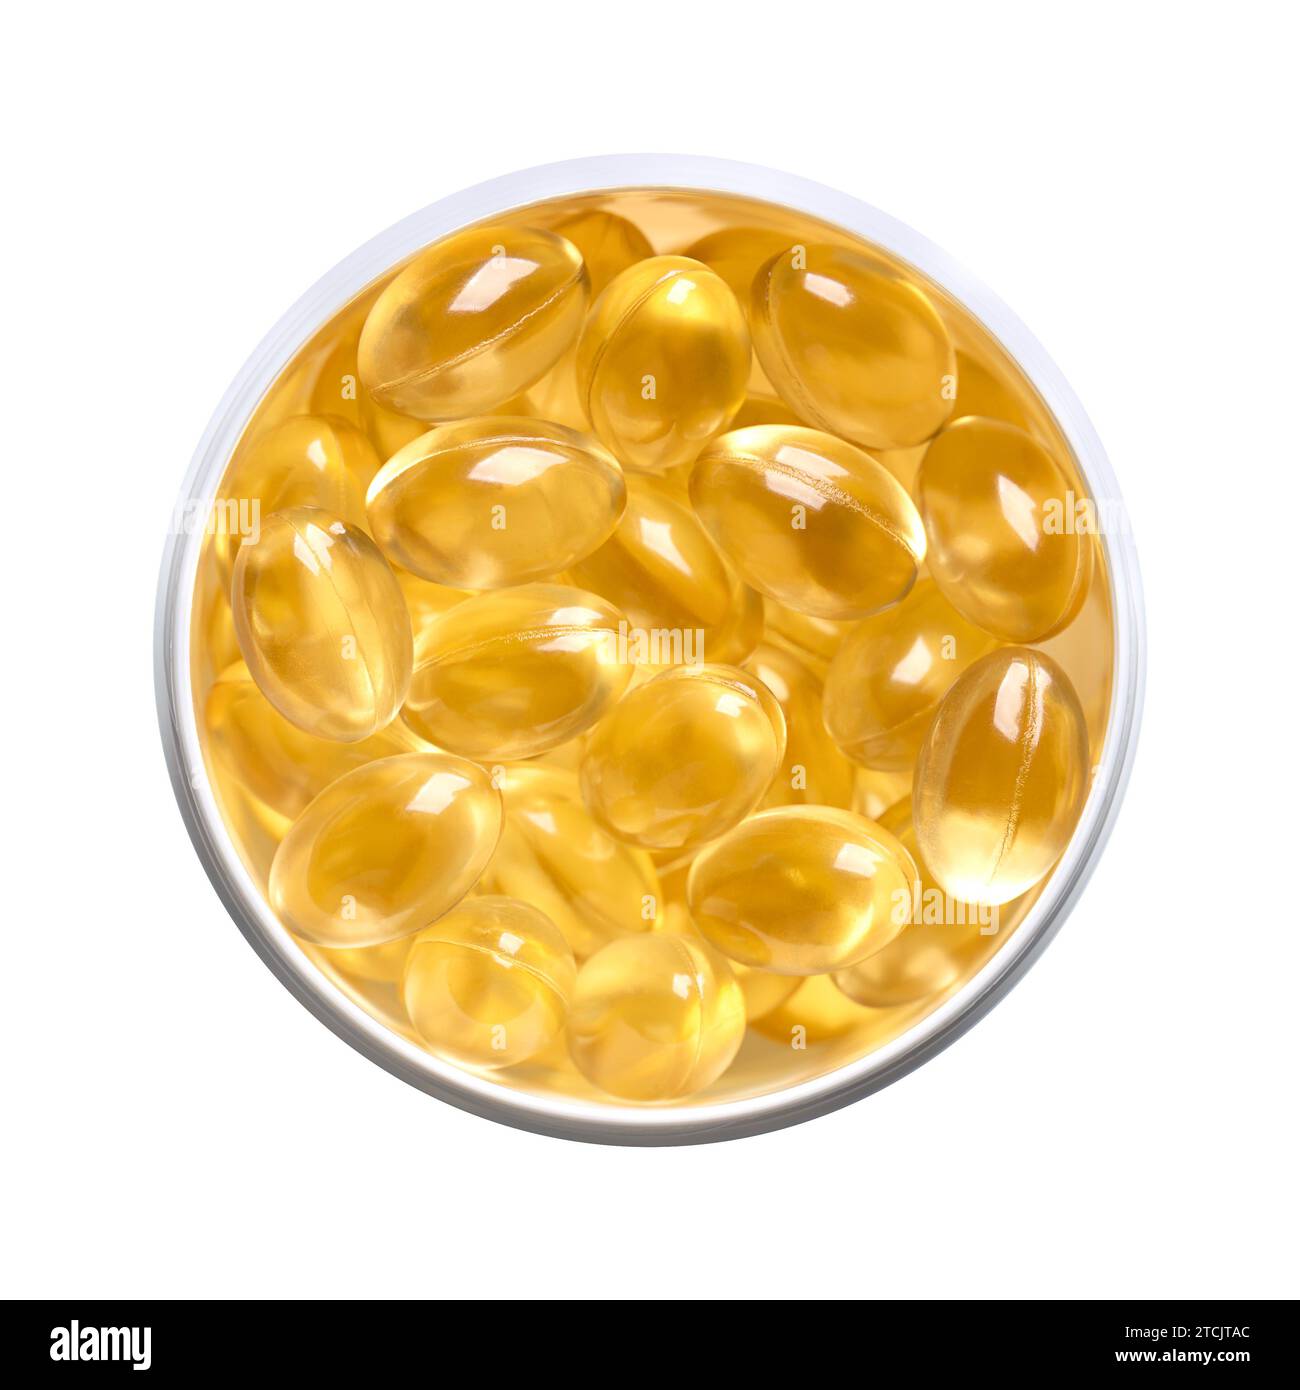 Soft gel capsules in a white plastic pill bottle. Oral dosage medicine or dietary supplement in the form of a transparent capsule. Stock Photo